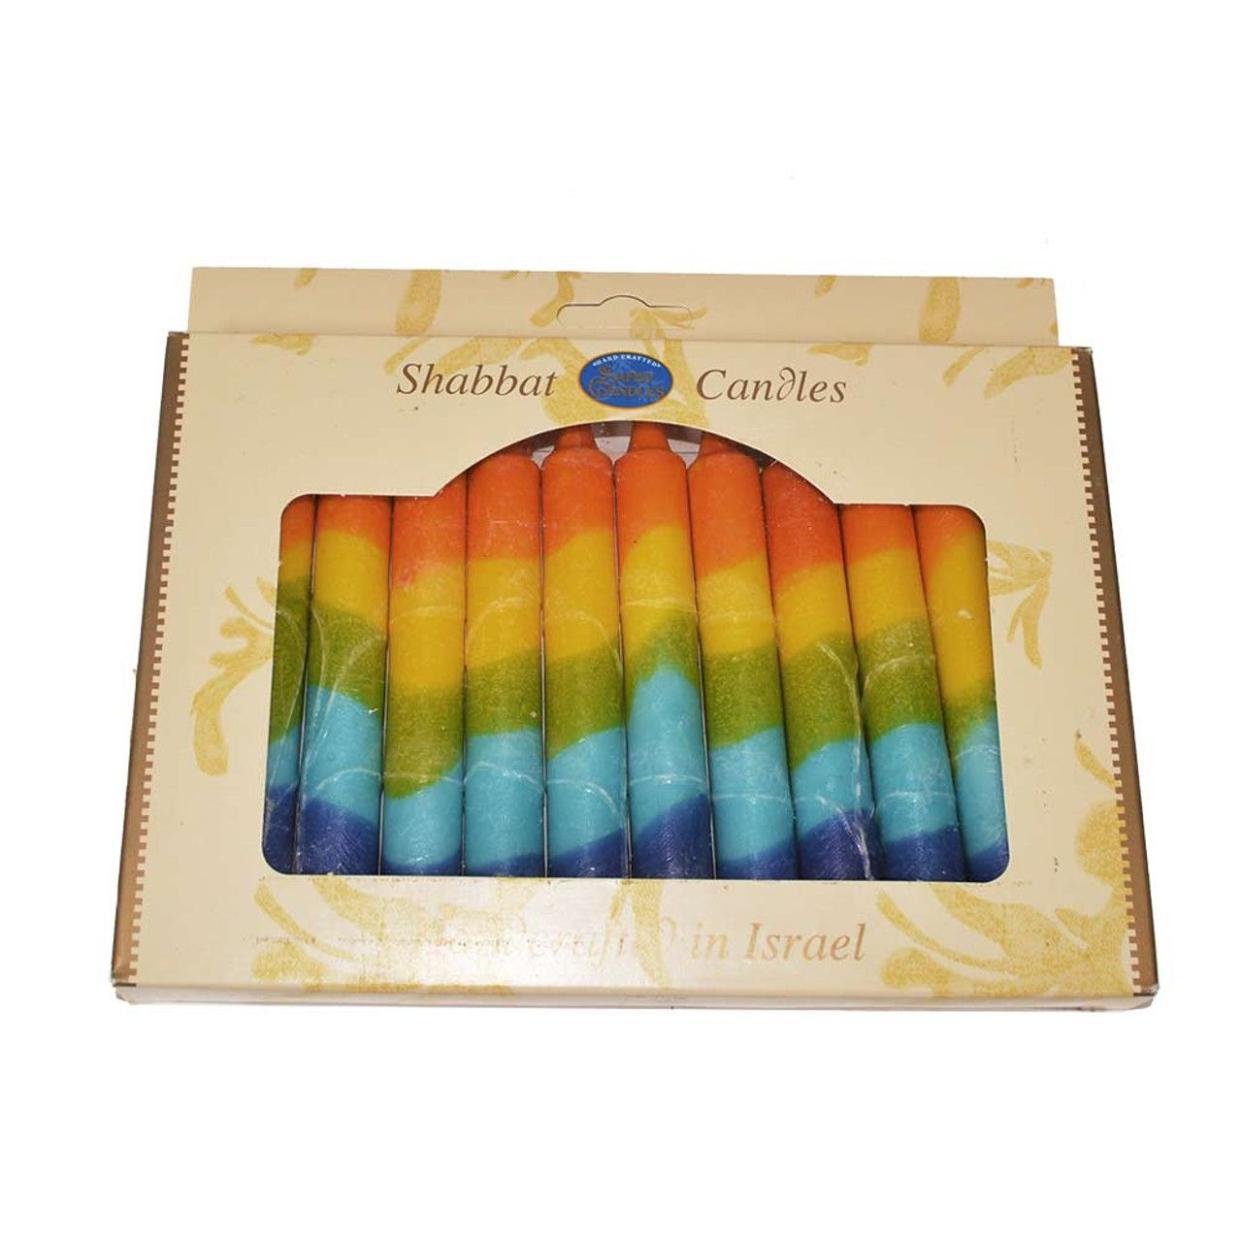 Handmade Shabbat Candles in a colorful rainbow design